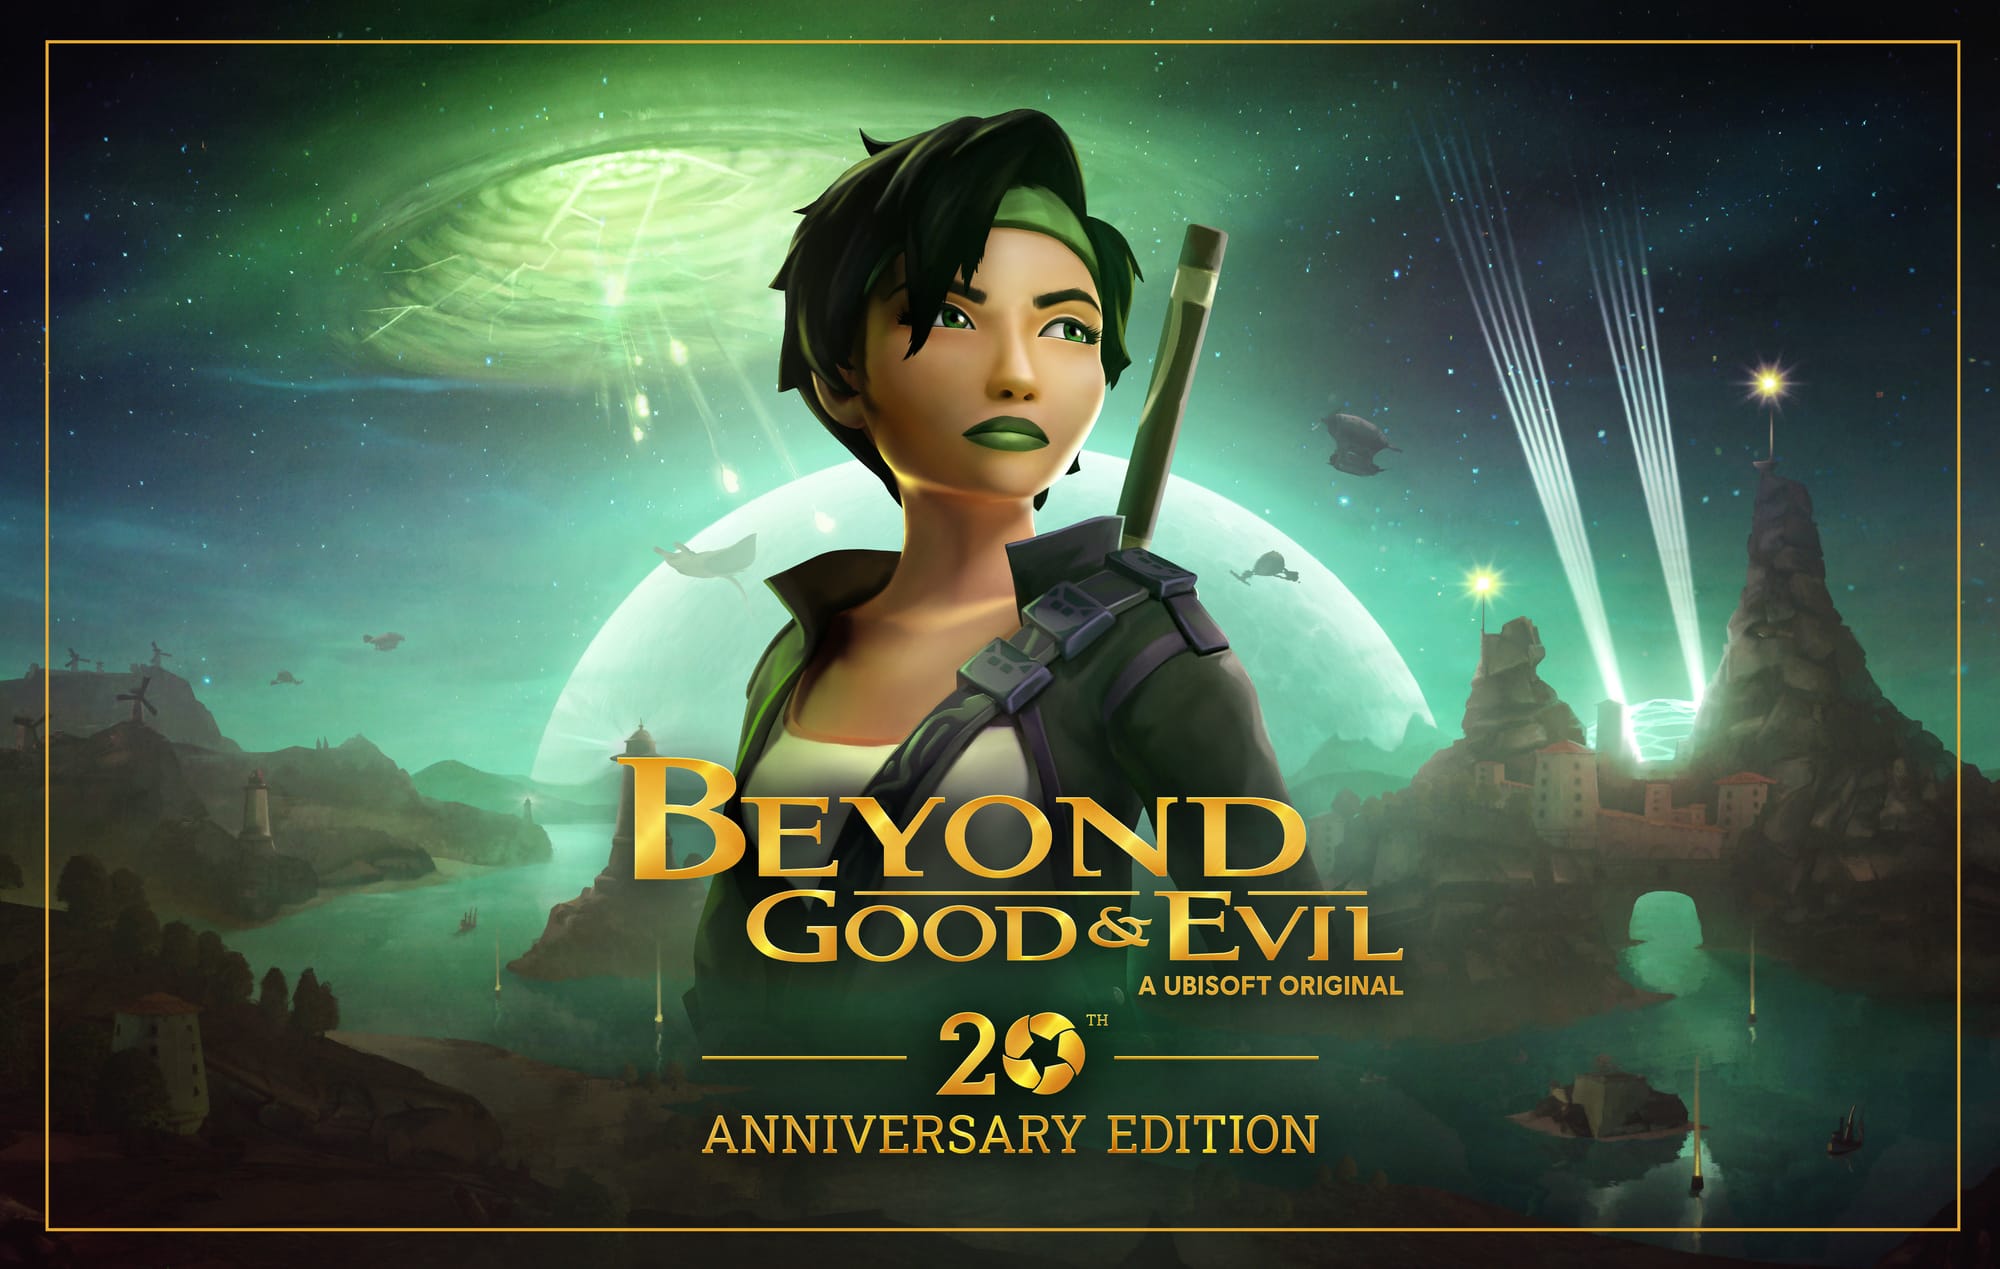 Ubisoft Announces Beyond Good & Evil - 20th Anniversary Edition at Limited Run Games Showcase